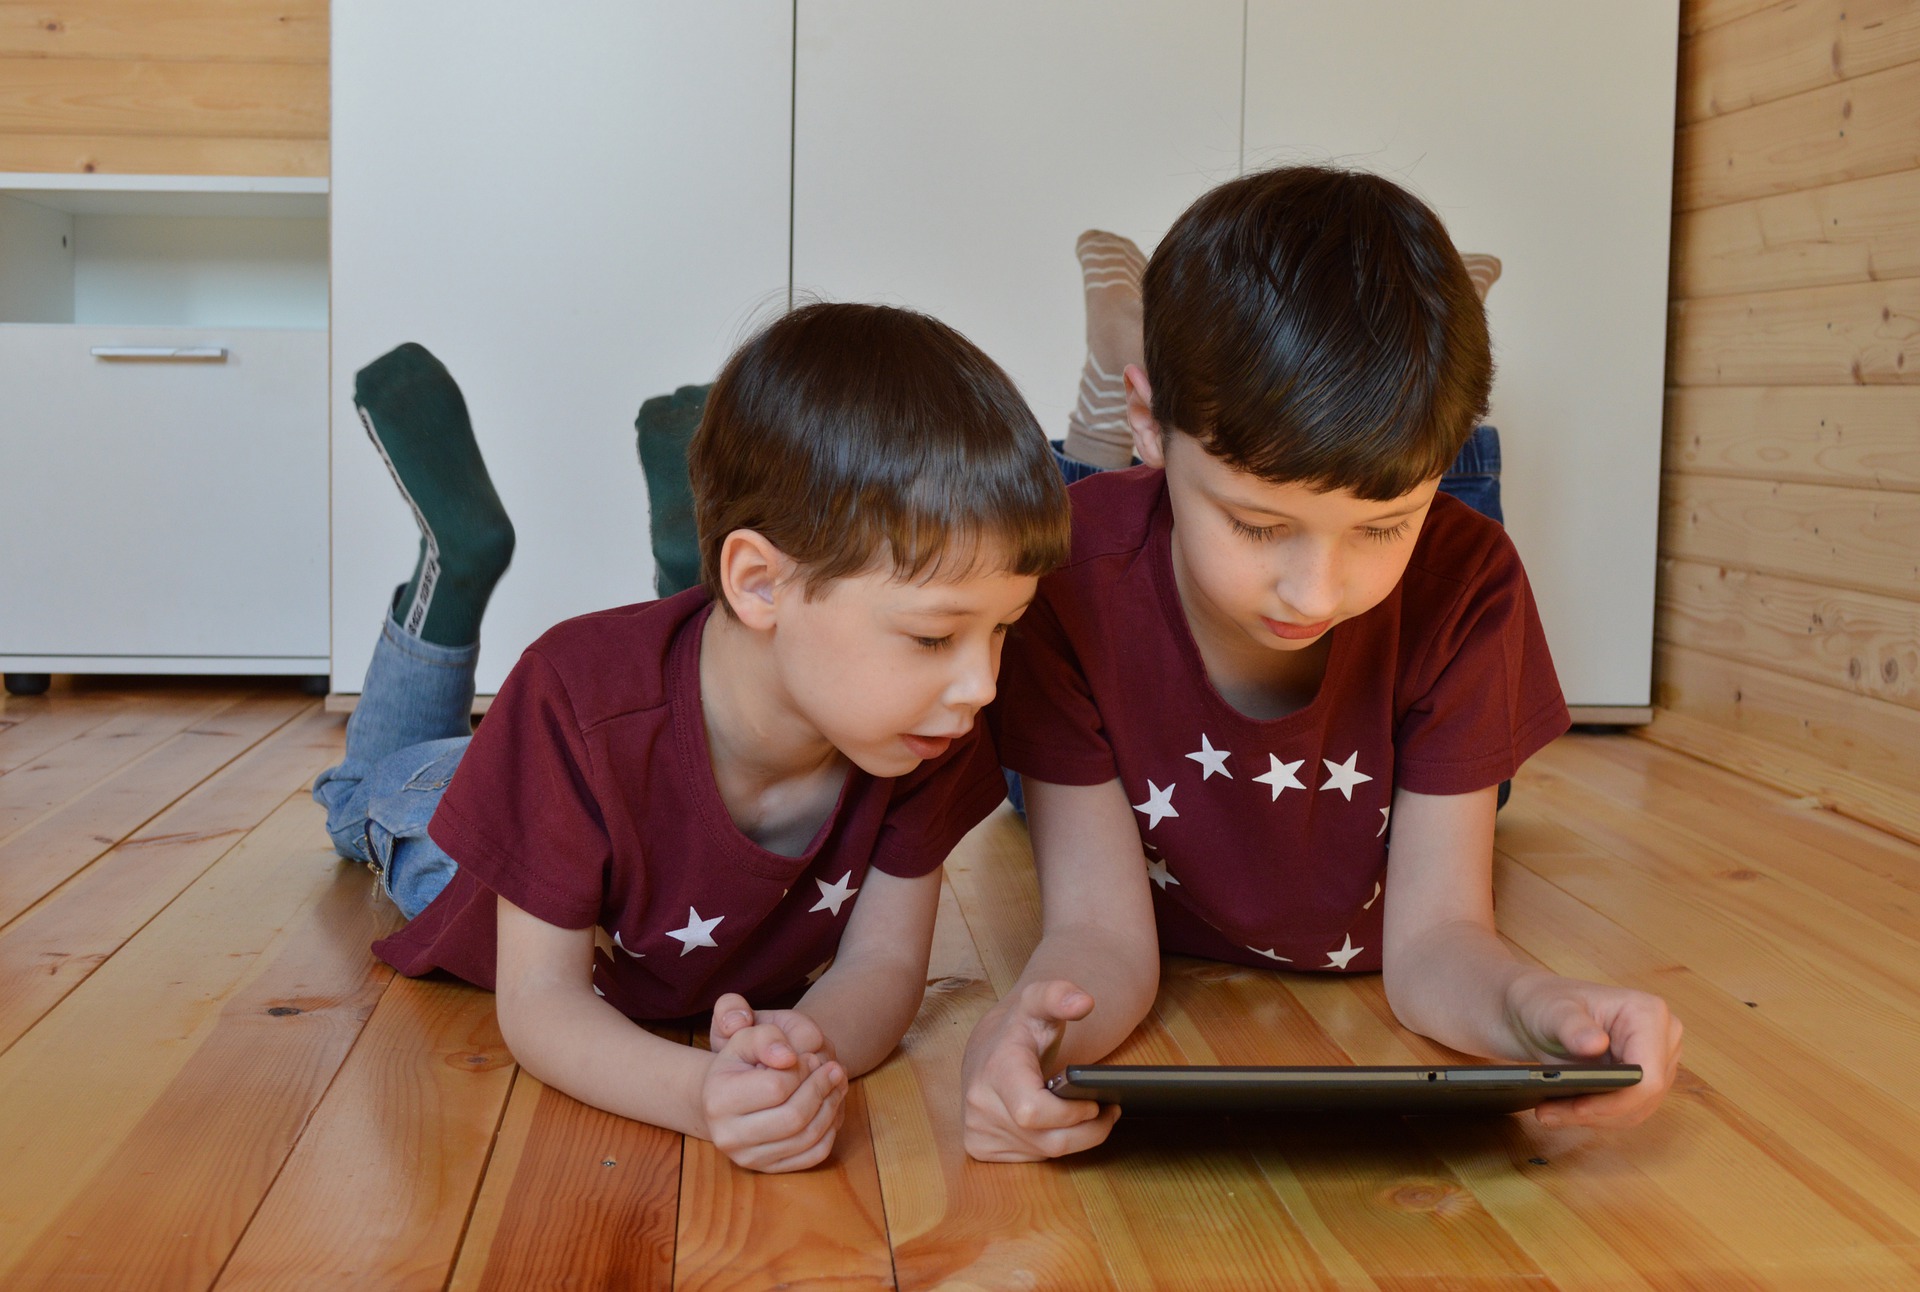 Two boys looking at a tablet